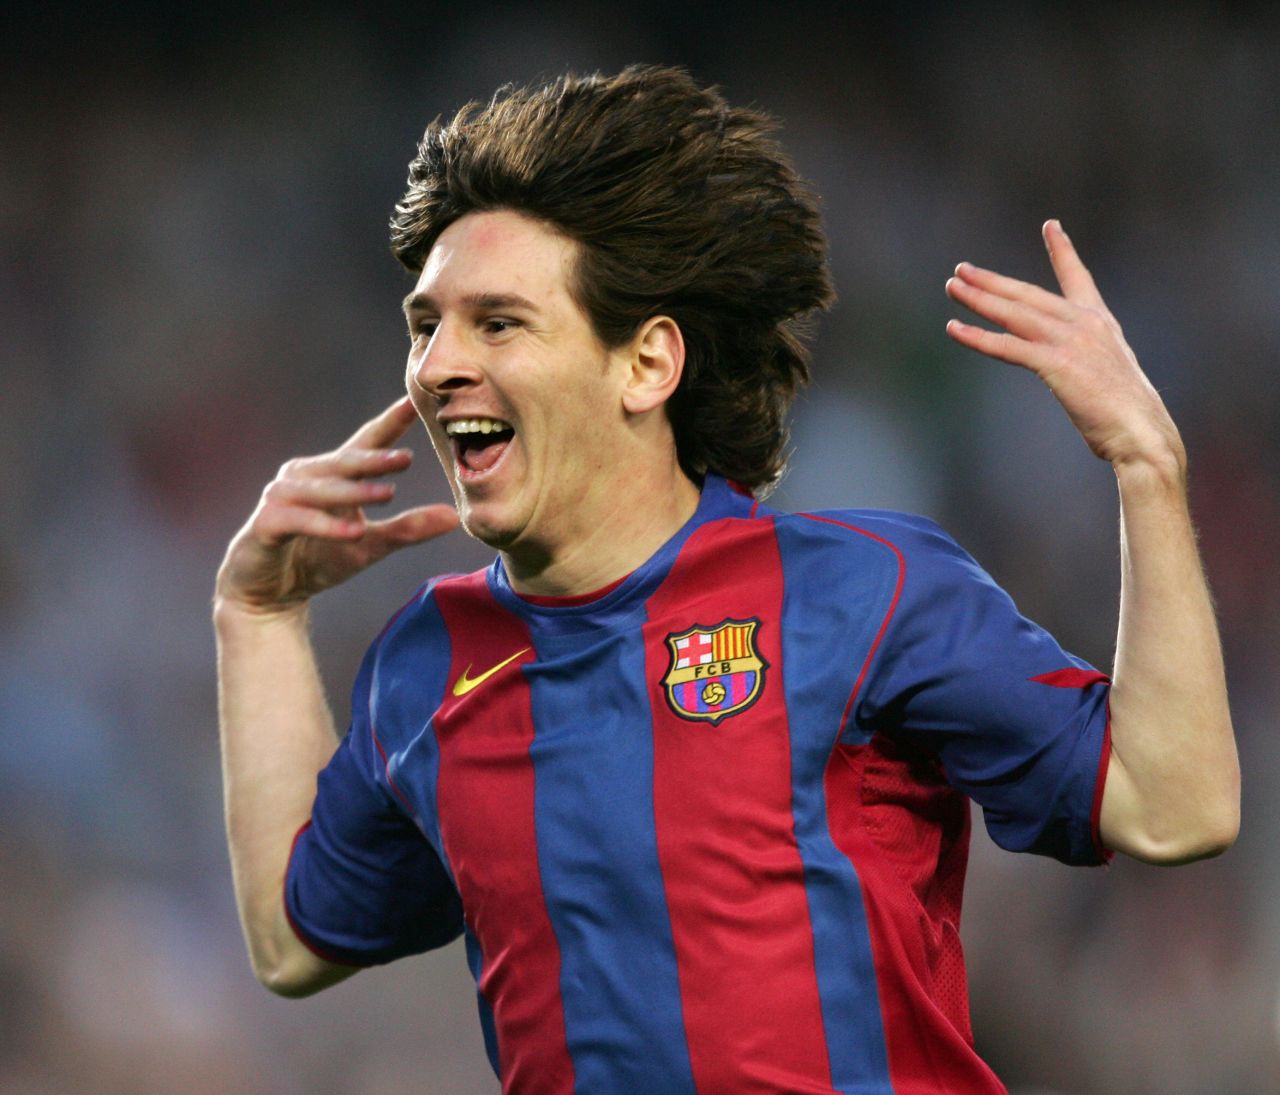 Messi's first goal for Barca came in May 2005 against Albacete, a strike which made him the youngest goalscorer in the club's history. The record was later broken by Spain's Bojan Krkic, who is now with Italian Serie A side Roma.